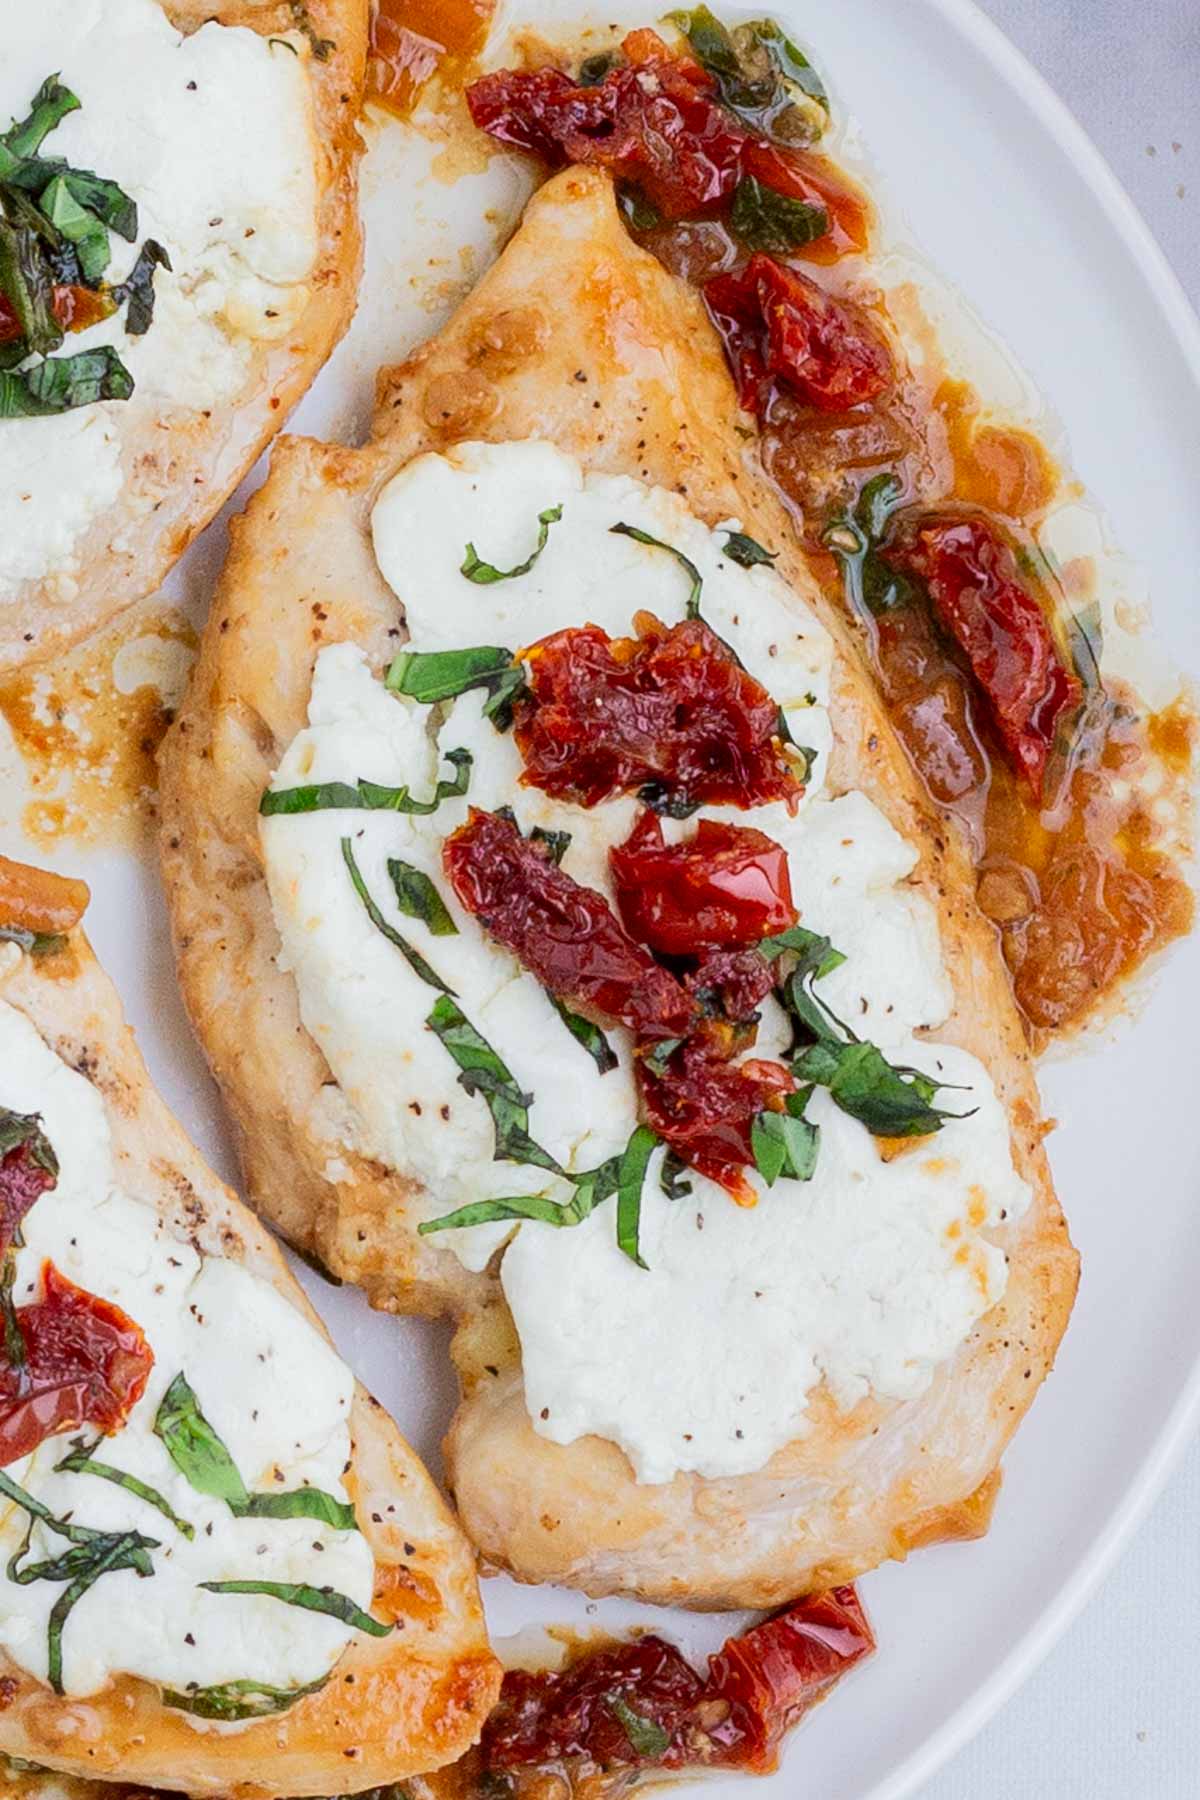 Chicken breasts are cooked in a butter sauce and topped with goat cheese and sundried tomatoes.